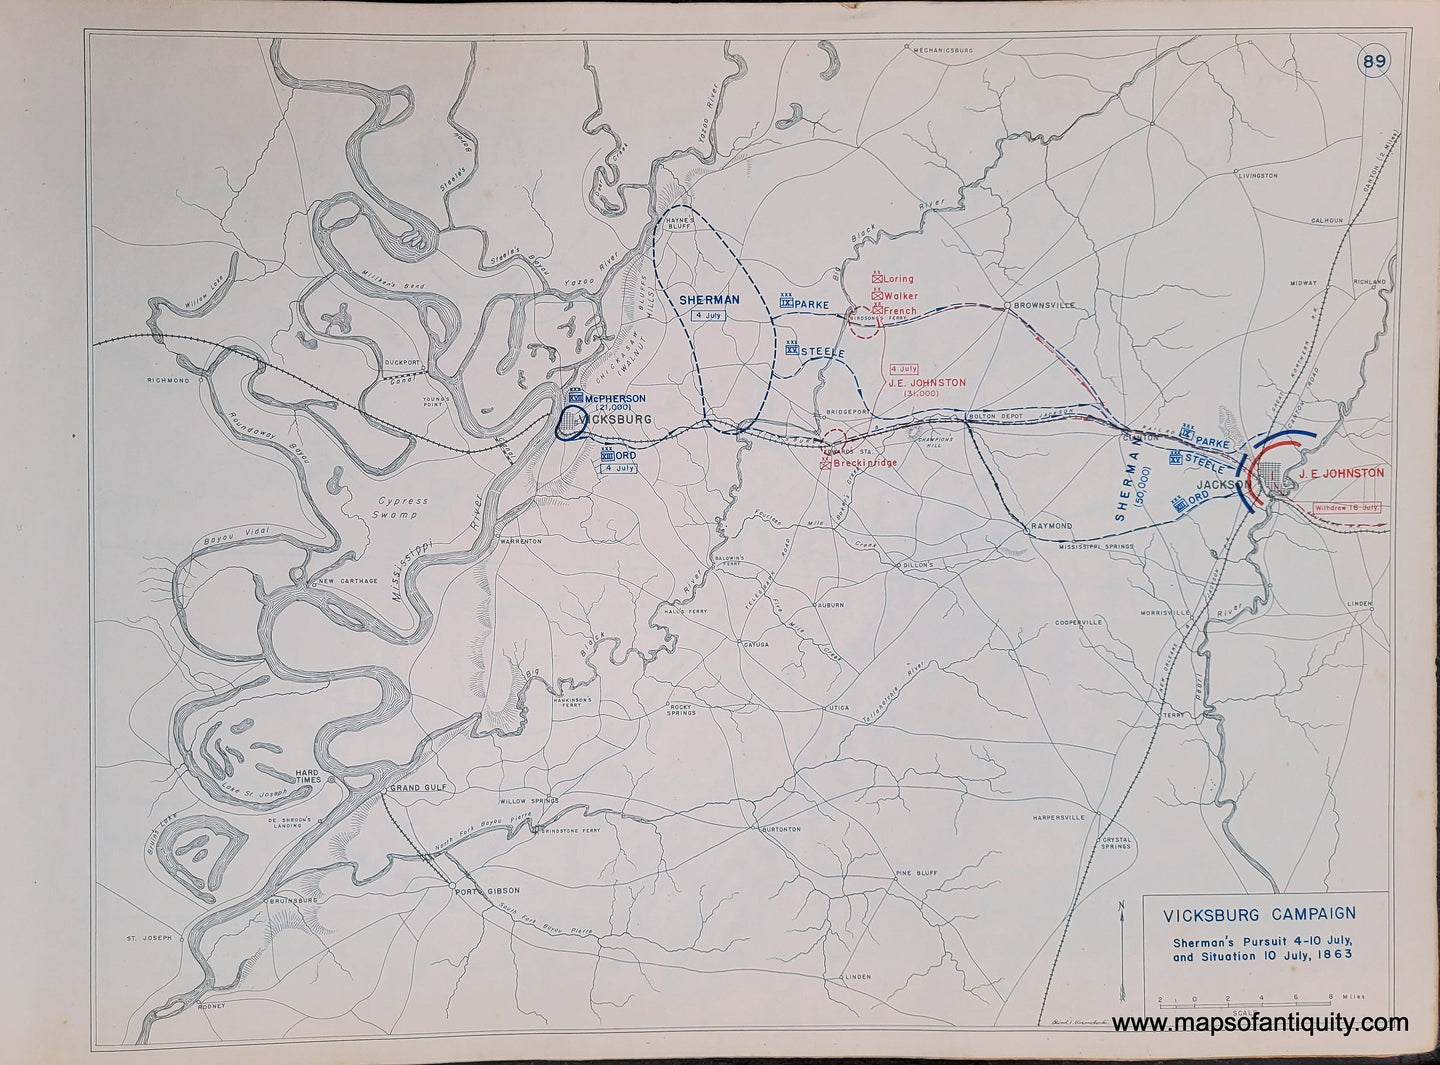 Genuine-Antique-Map-Vicksburg-Campaign-Sherman's-Pursuit-4-10-July-and-Situation-10-July-1863-1948-Matthew-Forney-Steele-Dept-of-Military-Art-and-Engineering-US-Military-Academy-West-Point-Maps-Of-Antiquity